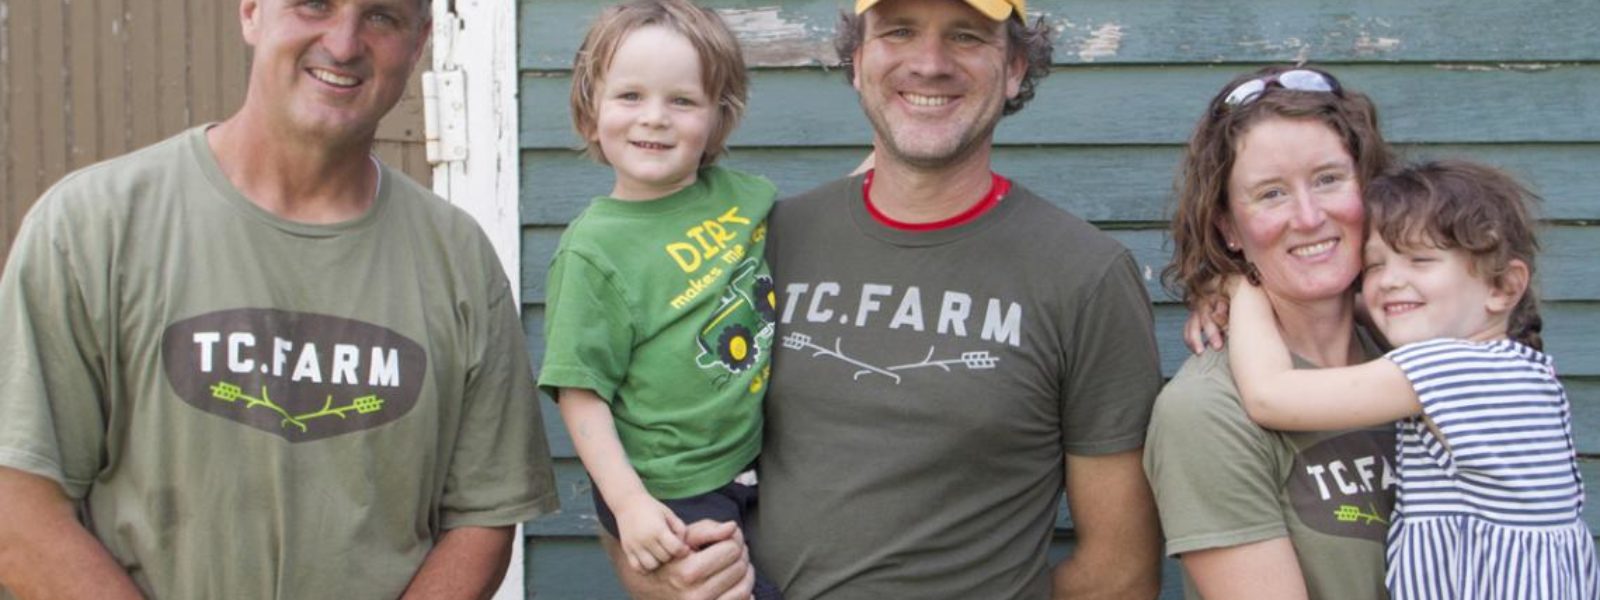 A group of people standing a smiling wearing TC Farm shirts